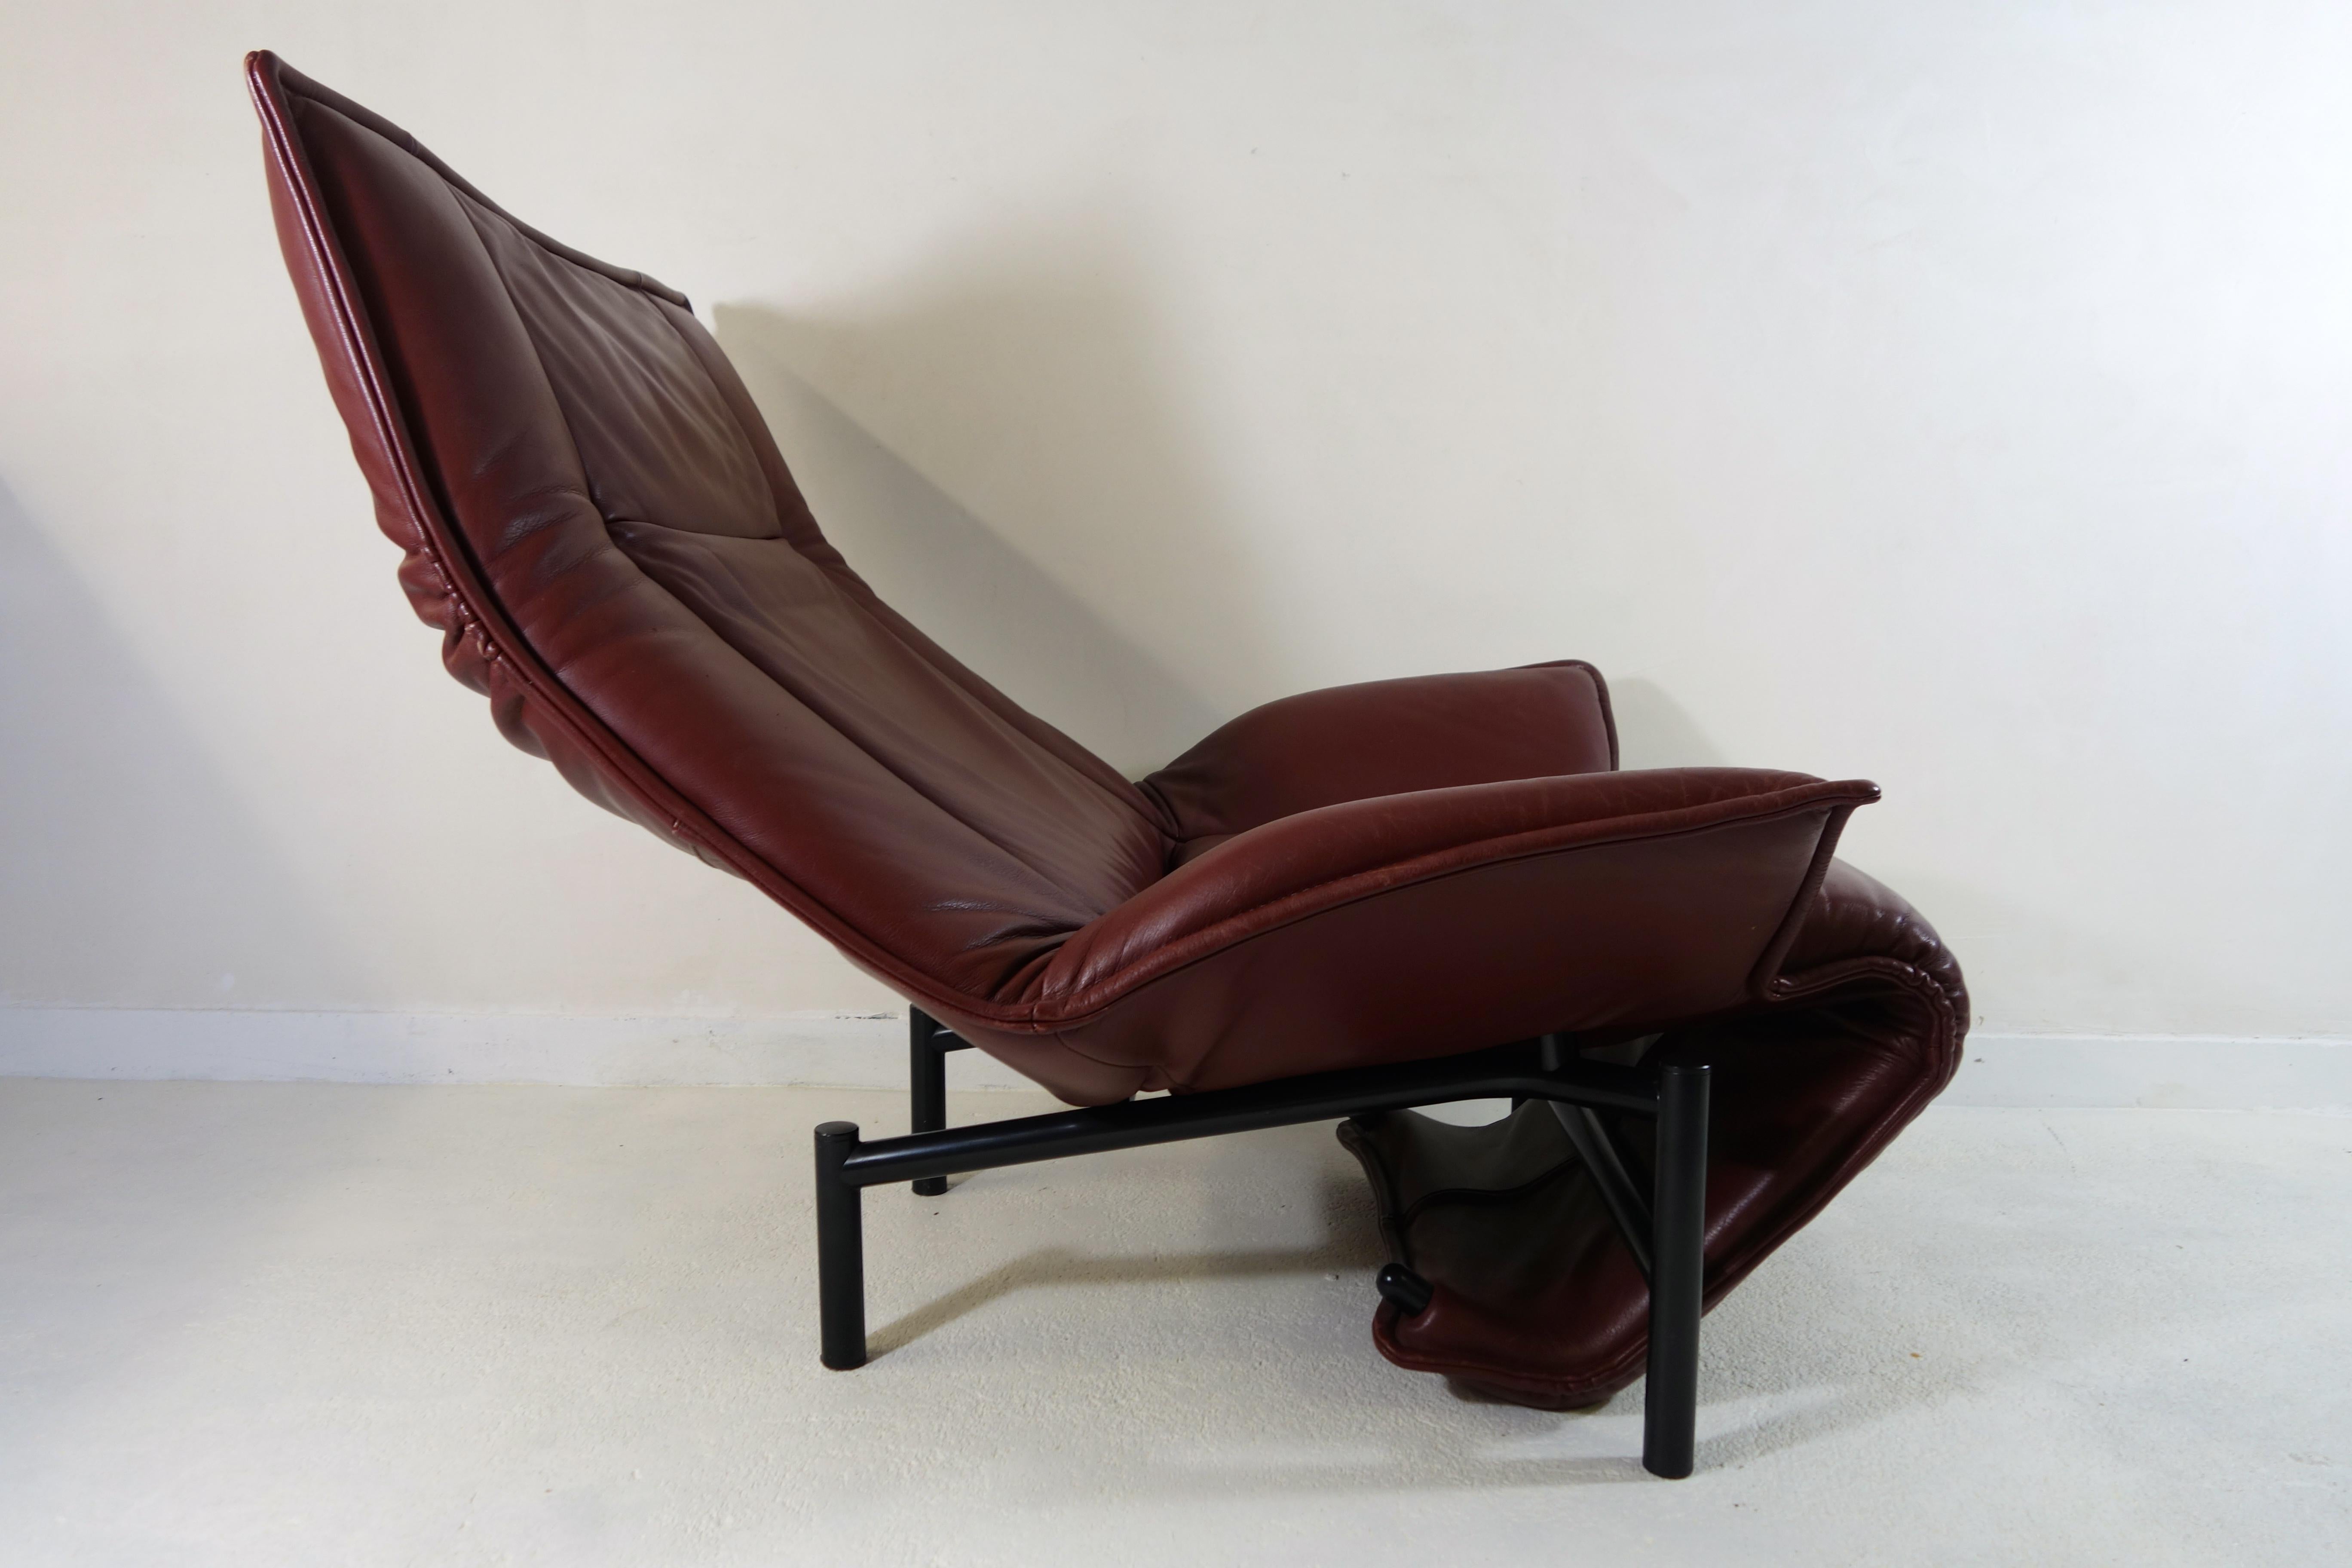 Vico Magistretti, probably best known for his Carimate Chair and Oluce Lamp, designed this extremely versatile lounge chair in 1983. 
In beautiful brown leather.
The Veranda can be positioned in multiple ways suiting your every mood. When extended